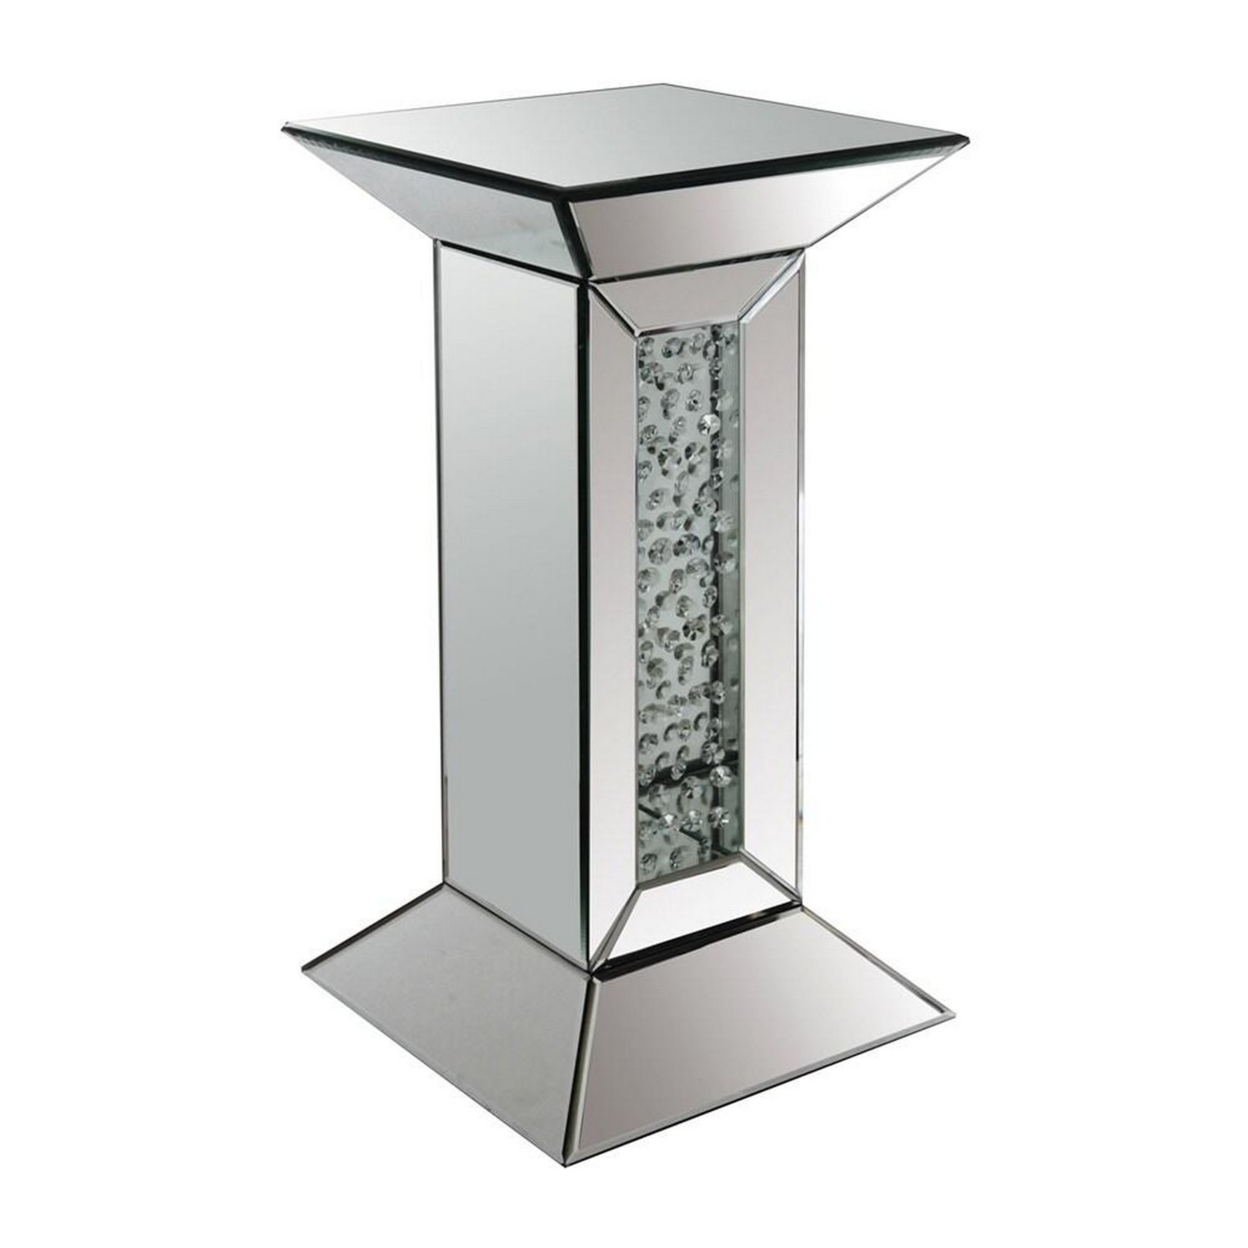 24 Inch Modern End Table, Square Mirror Top, Faux Crystals Inlay, Silver- Saltoro Sherpi